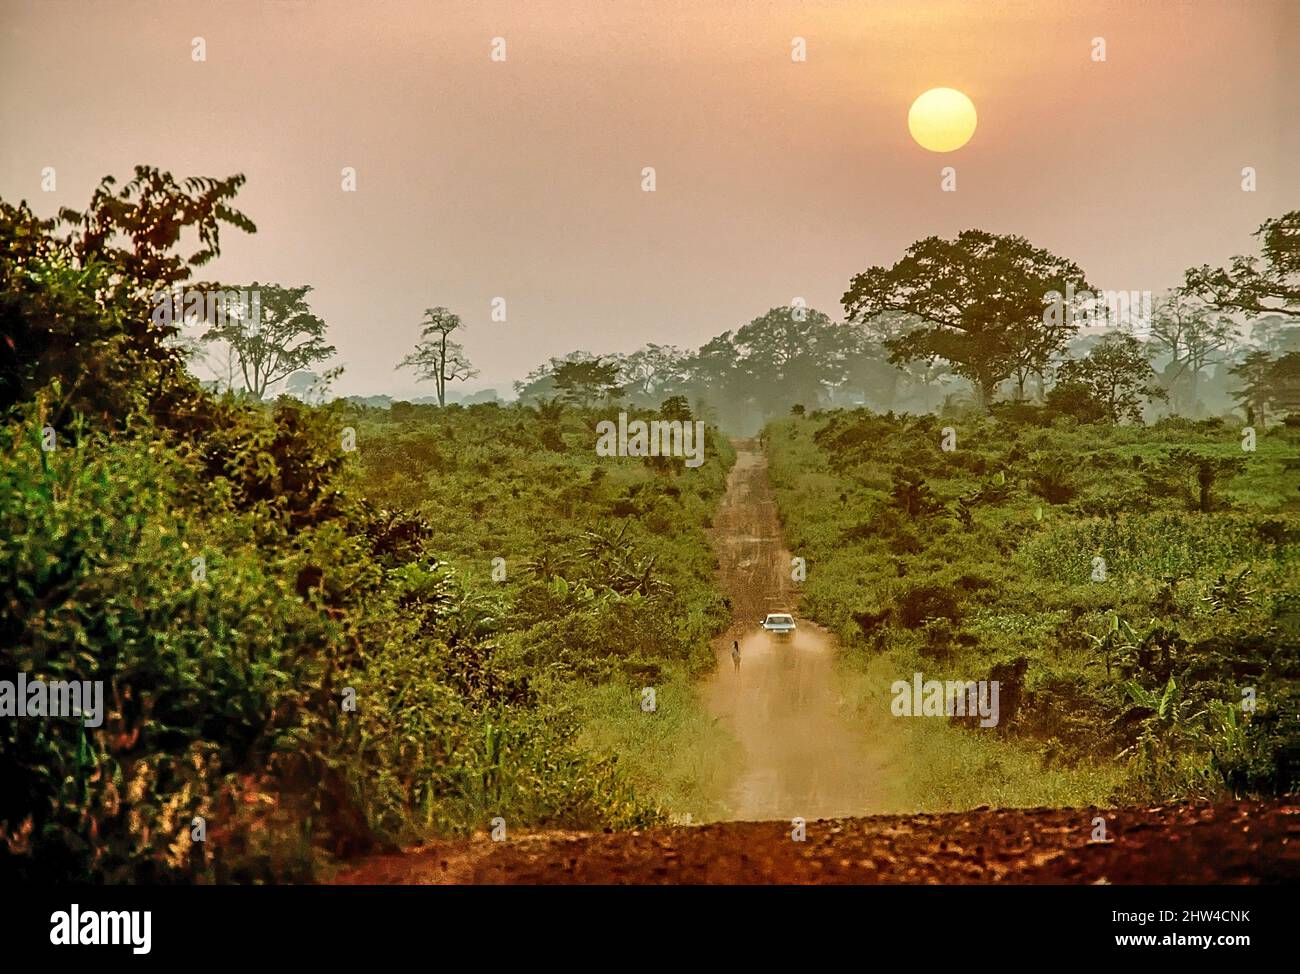 Dust road through the scrubland in Ghana, West Africa. Stock Photo